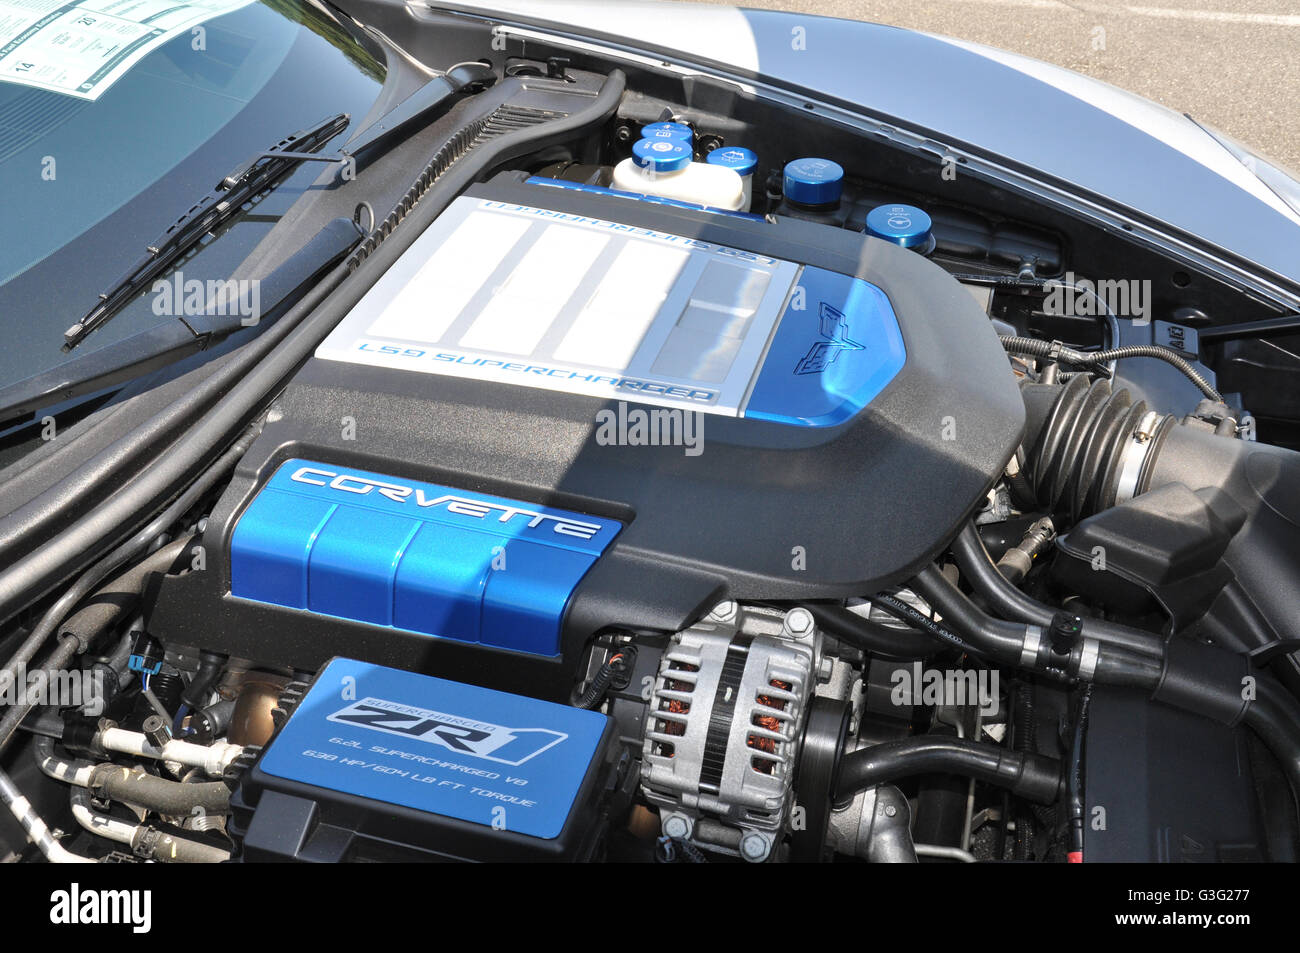 The 6.2 Liter LS9 Supercharged Corvette Engine in a ZR1 Corvette. Stock Photo